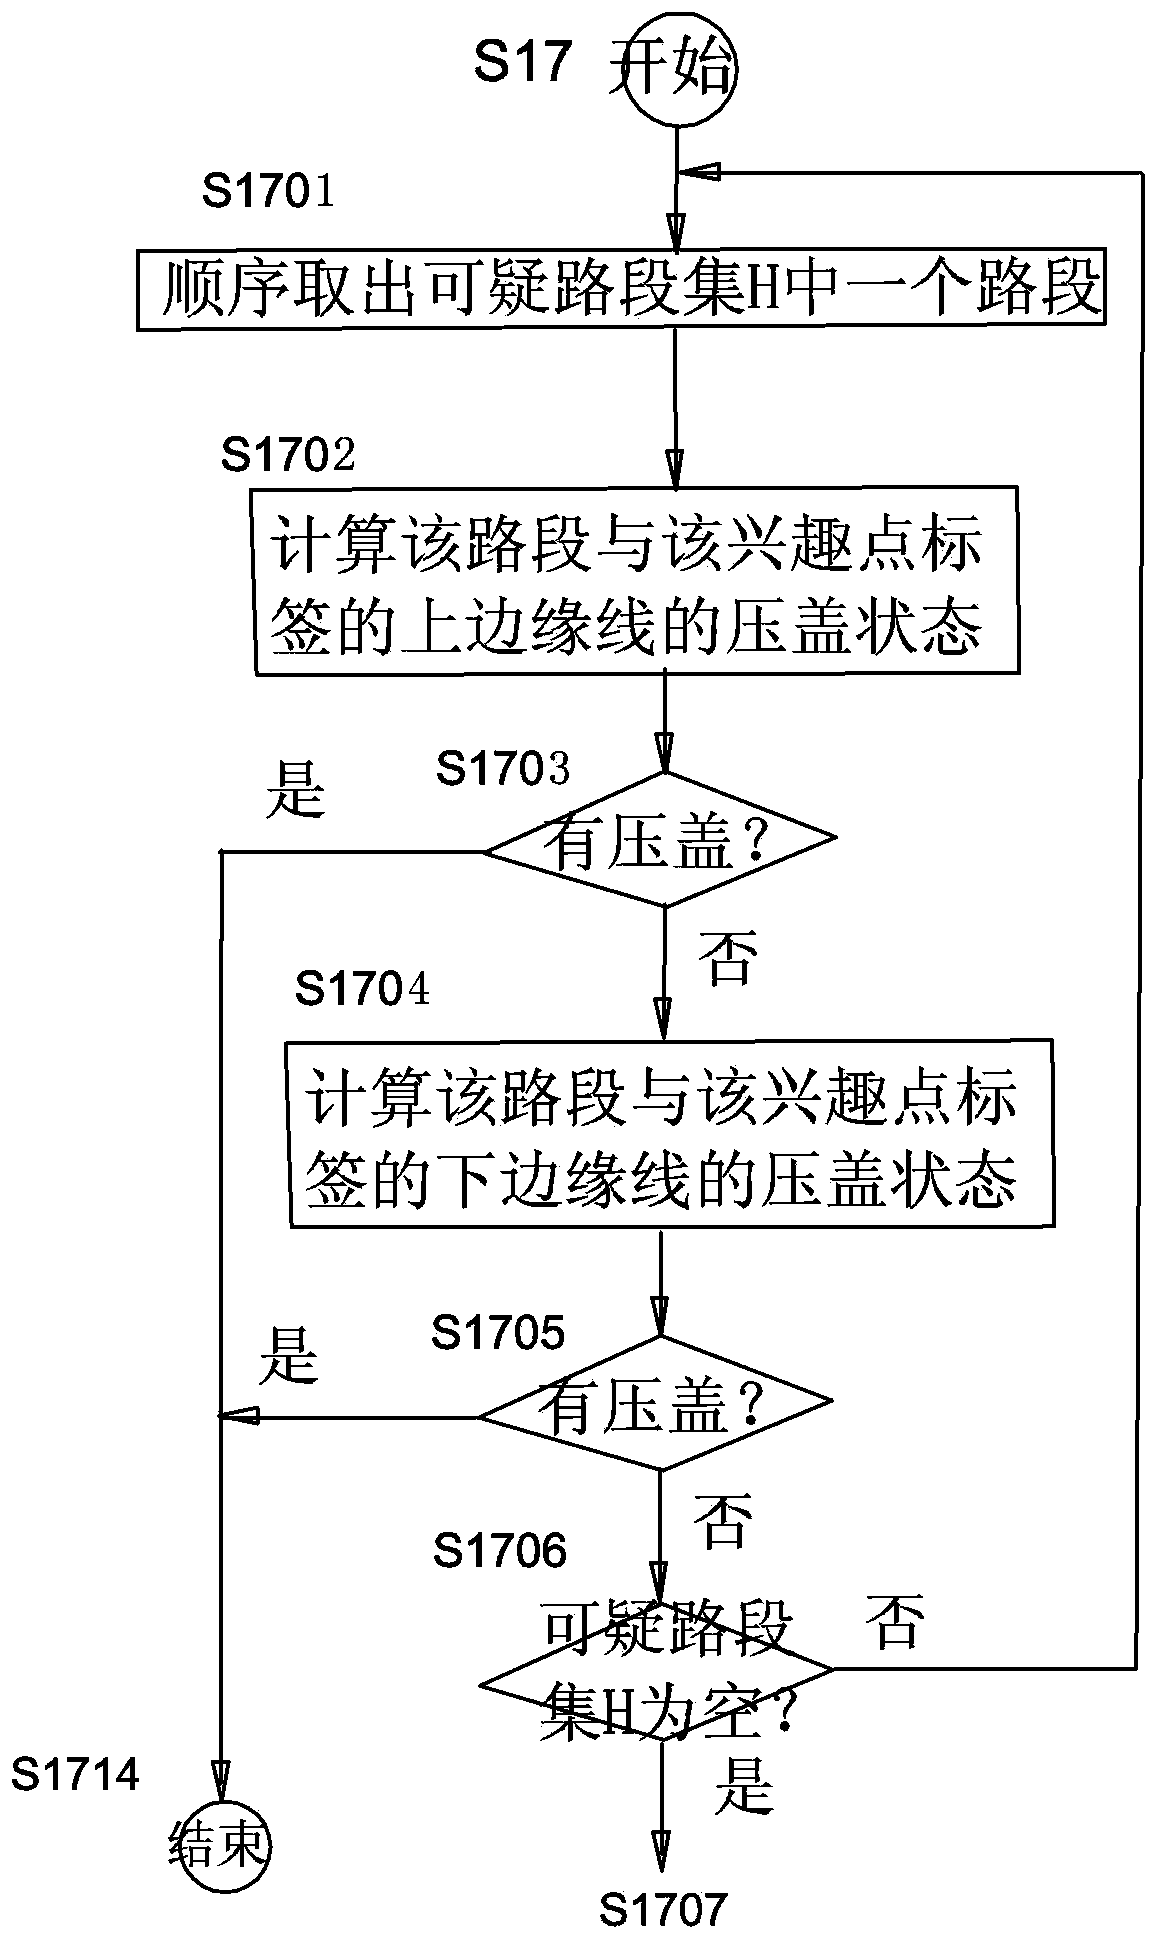 Method for elimination of electronic map interest point label covering of roads